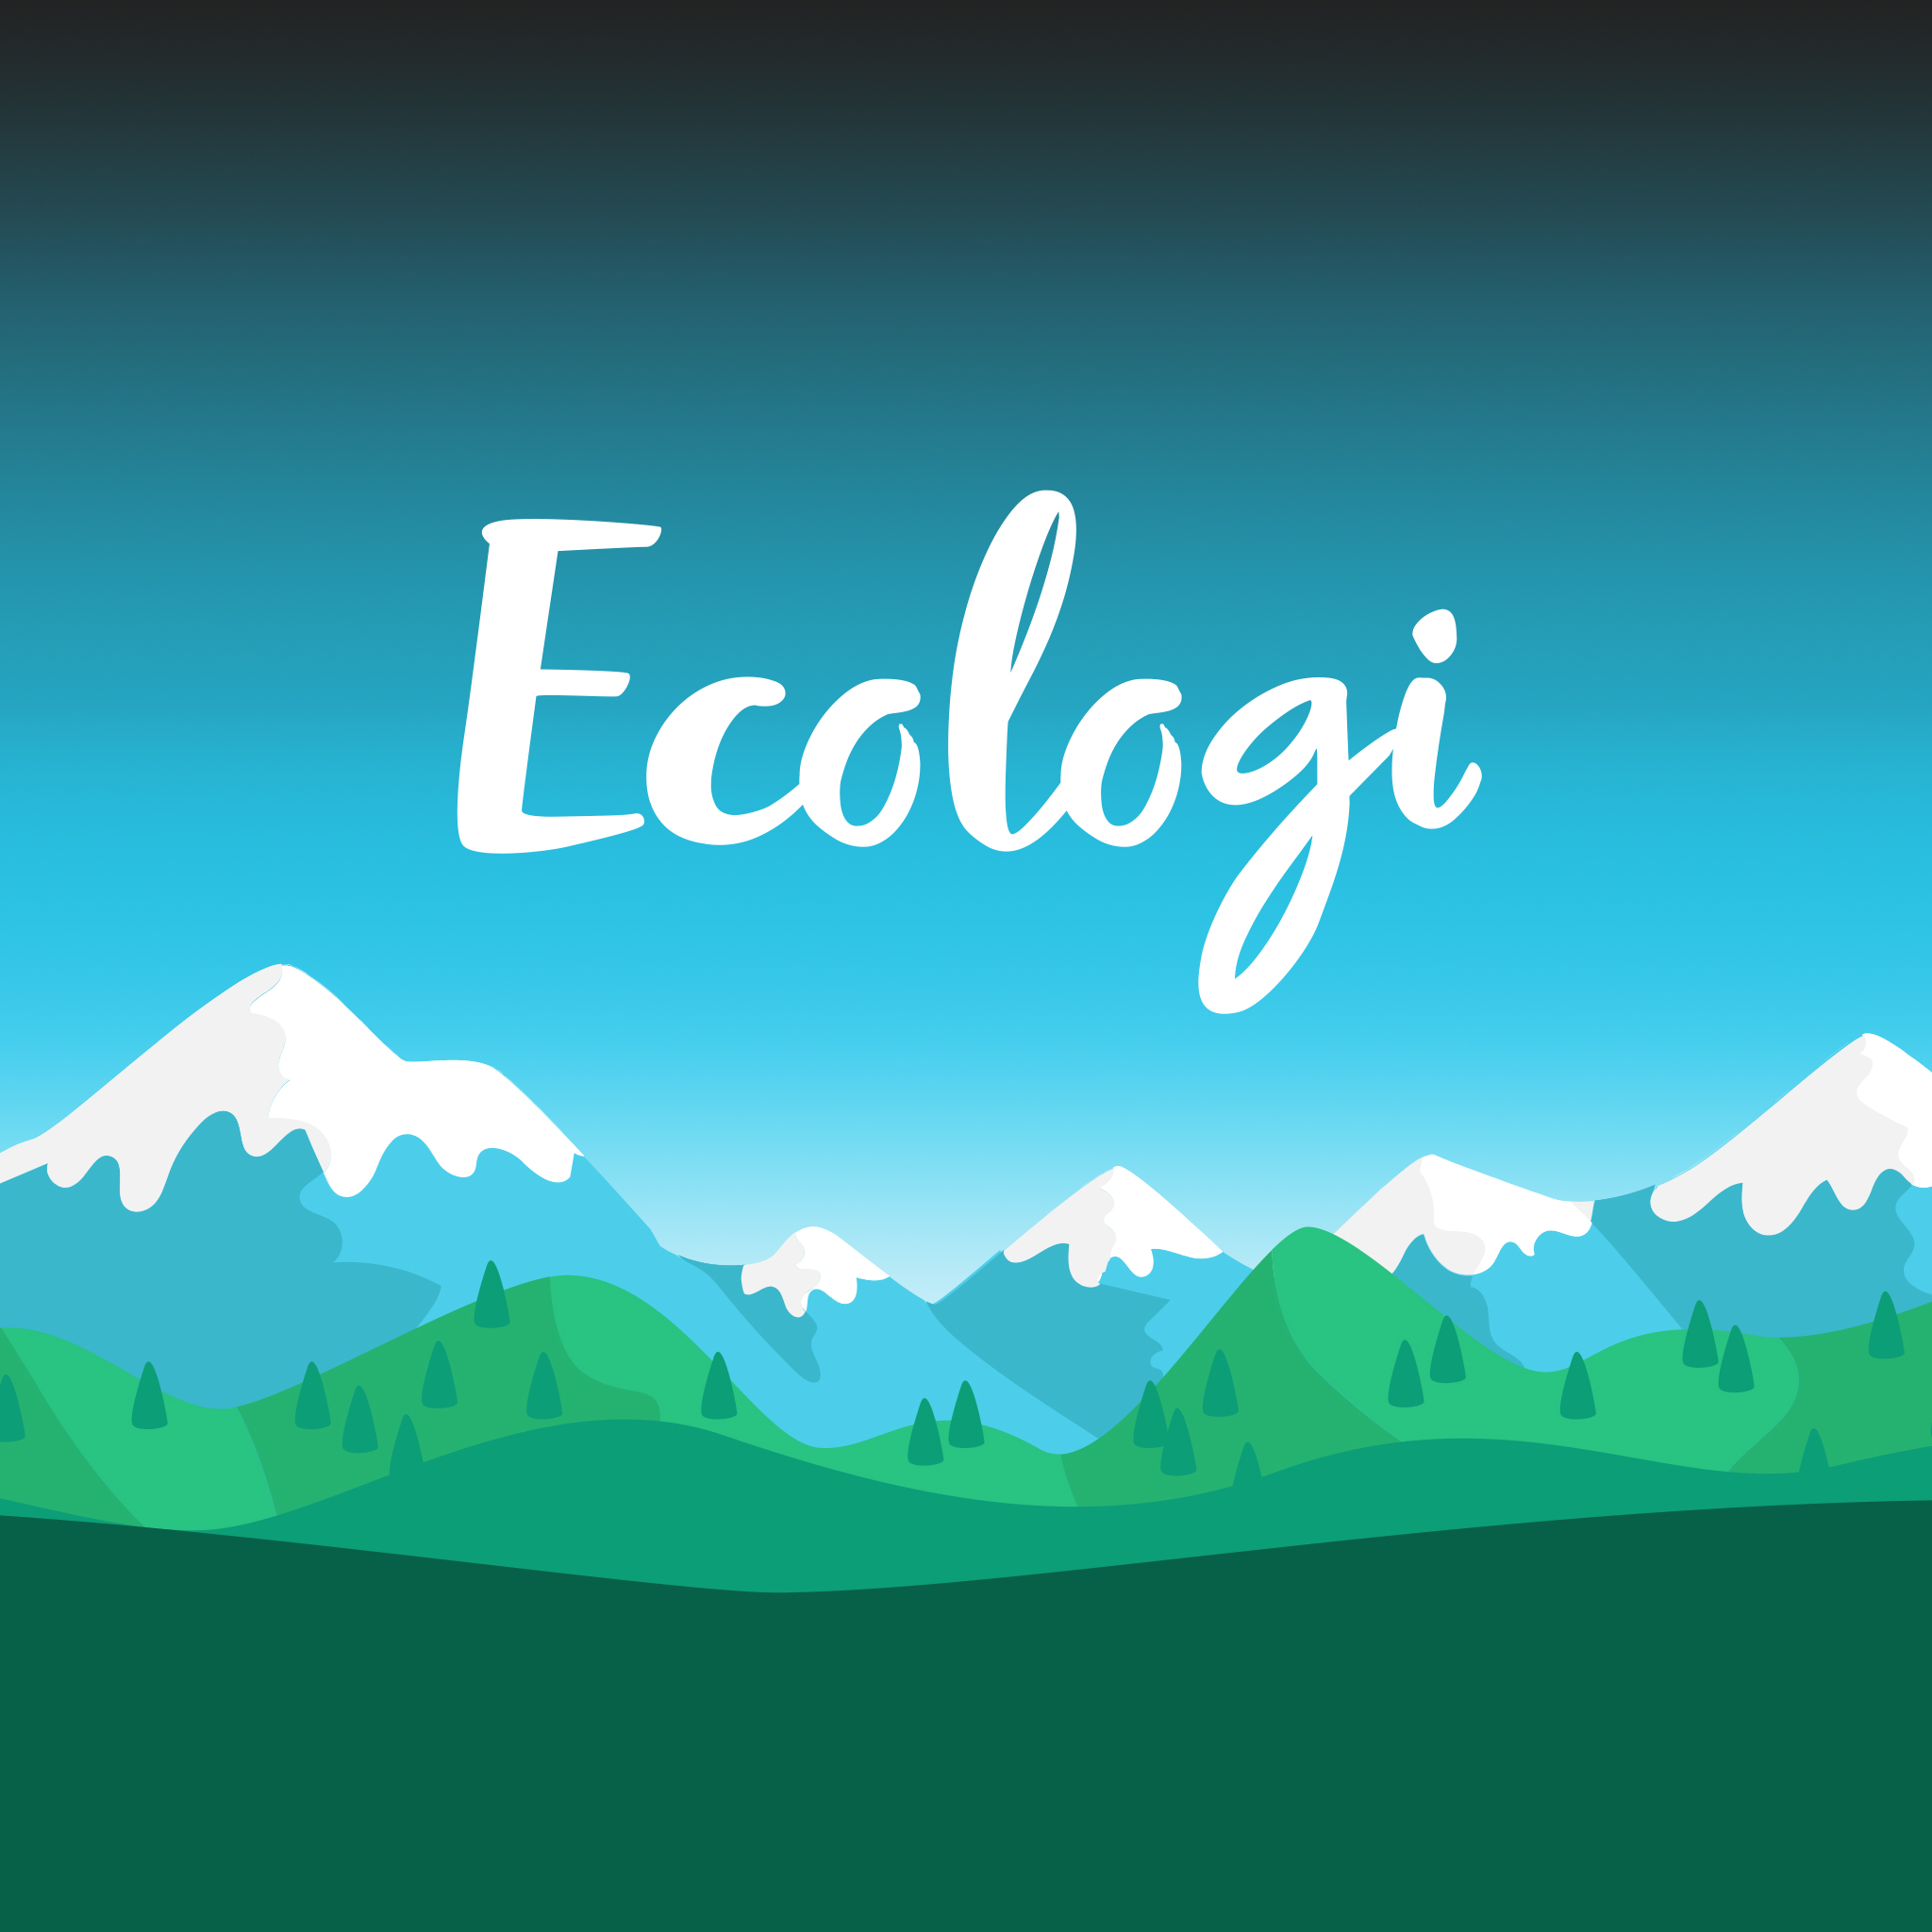 Catching up with Ecologi!